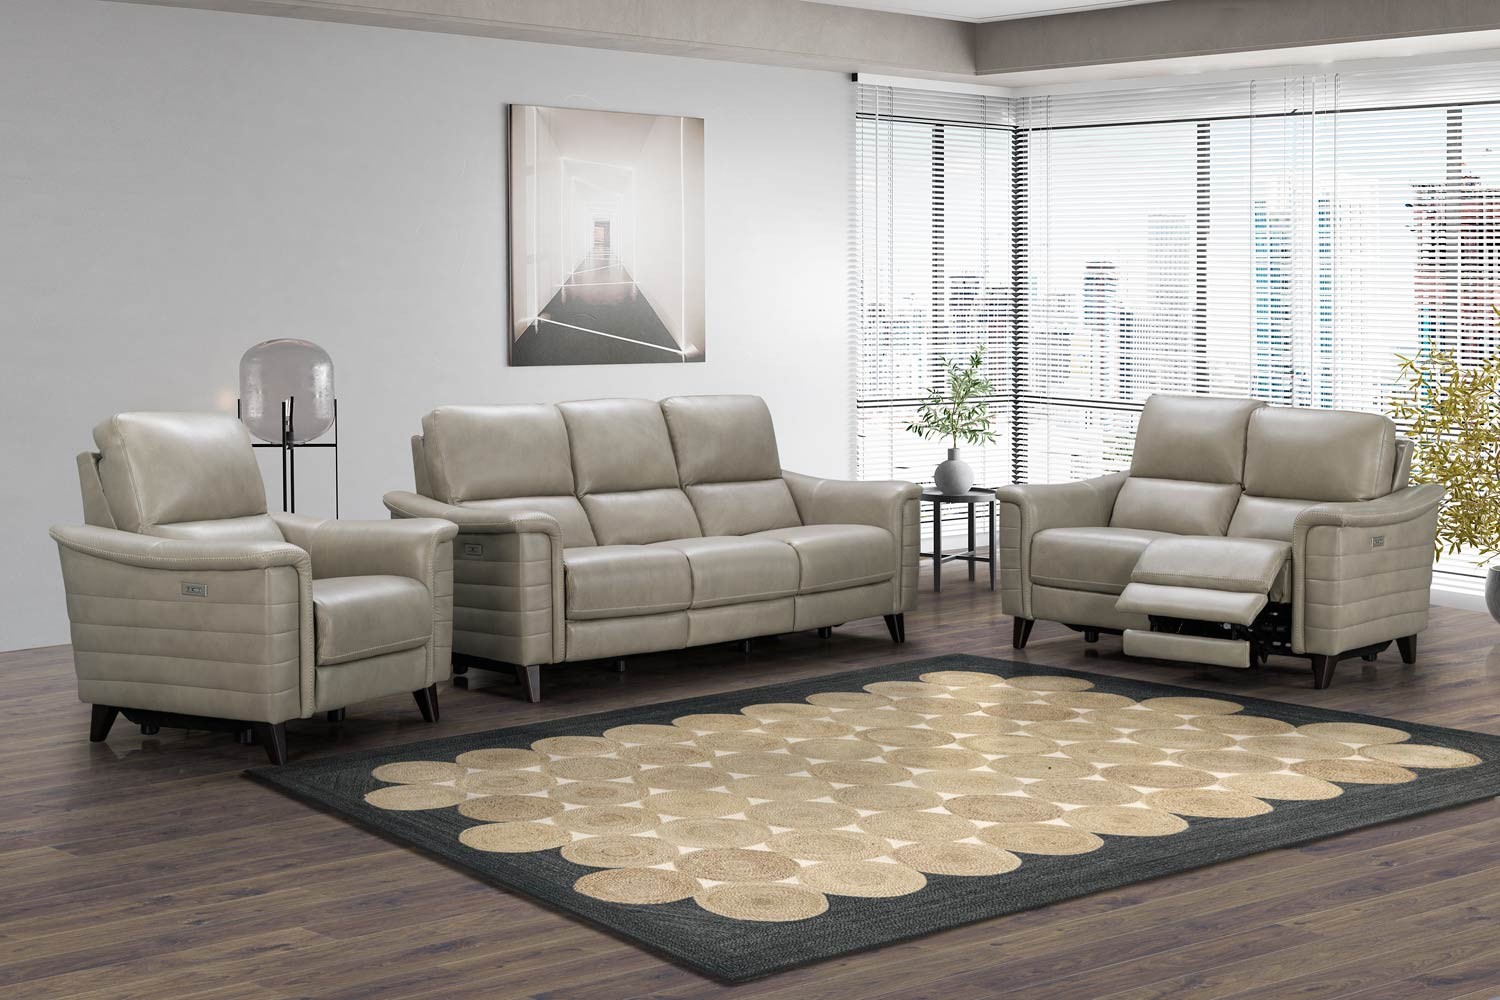 Barcalounger Malone Power Reclining Sofa Set with Power Head Rests - Sergi Gray Beige/Leather Match